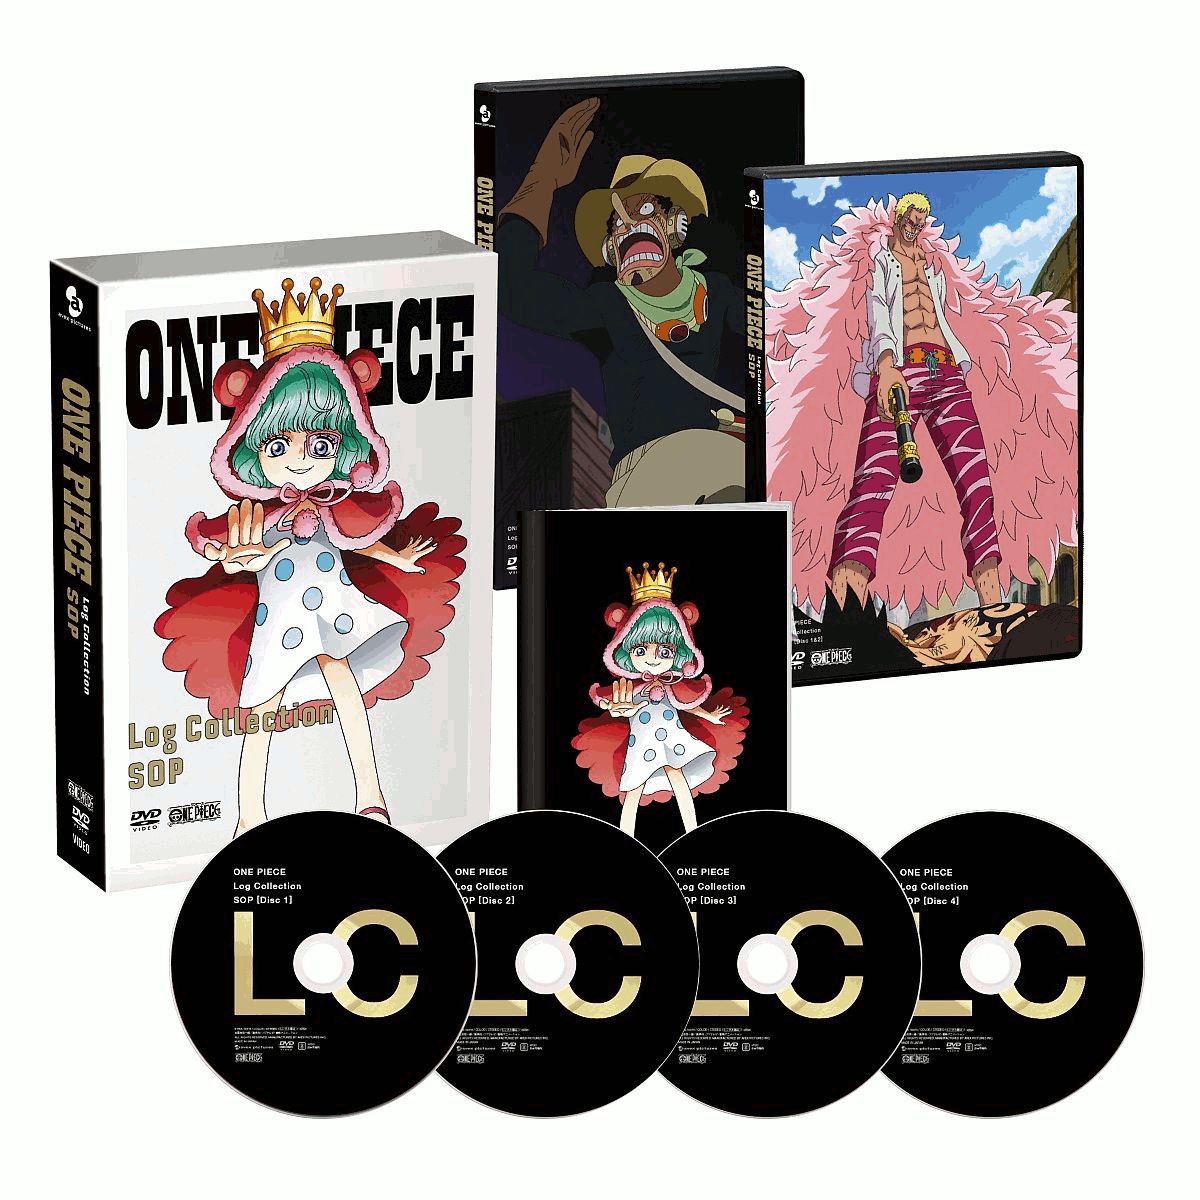 ONE PIECE Log Collection “SOP” [ 田中真弓 ]